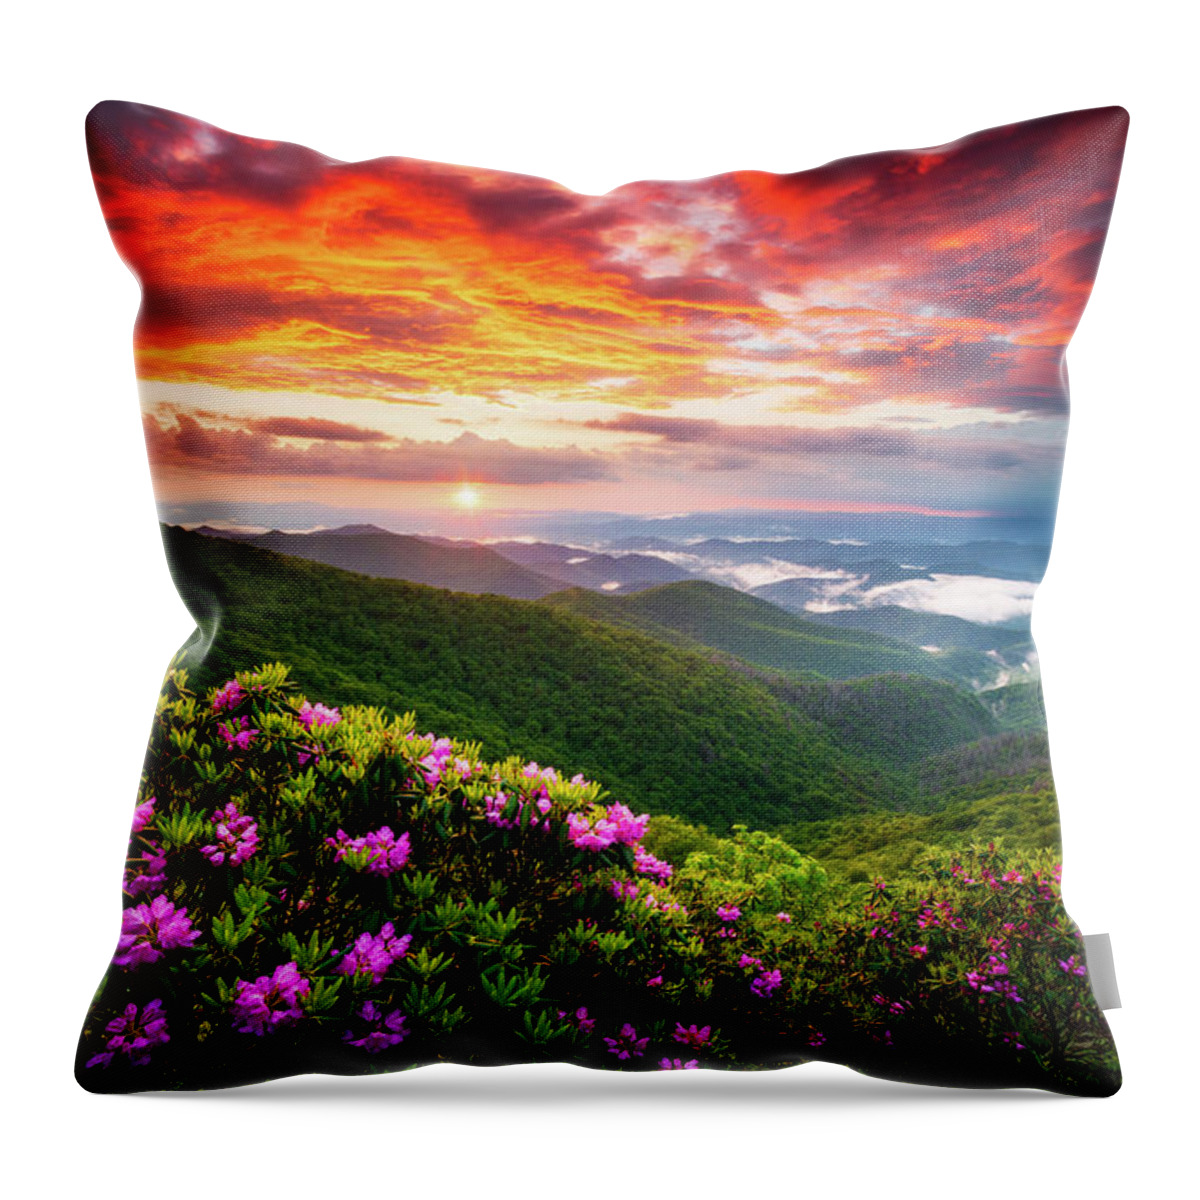 Blue Ridge Parkway Throw Pillow featuring the photograph Asheville North Carolina Blue Ridge Parkway Scenic Sunset Landscape by Dave Allen